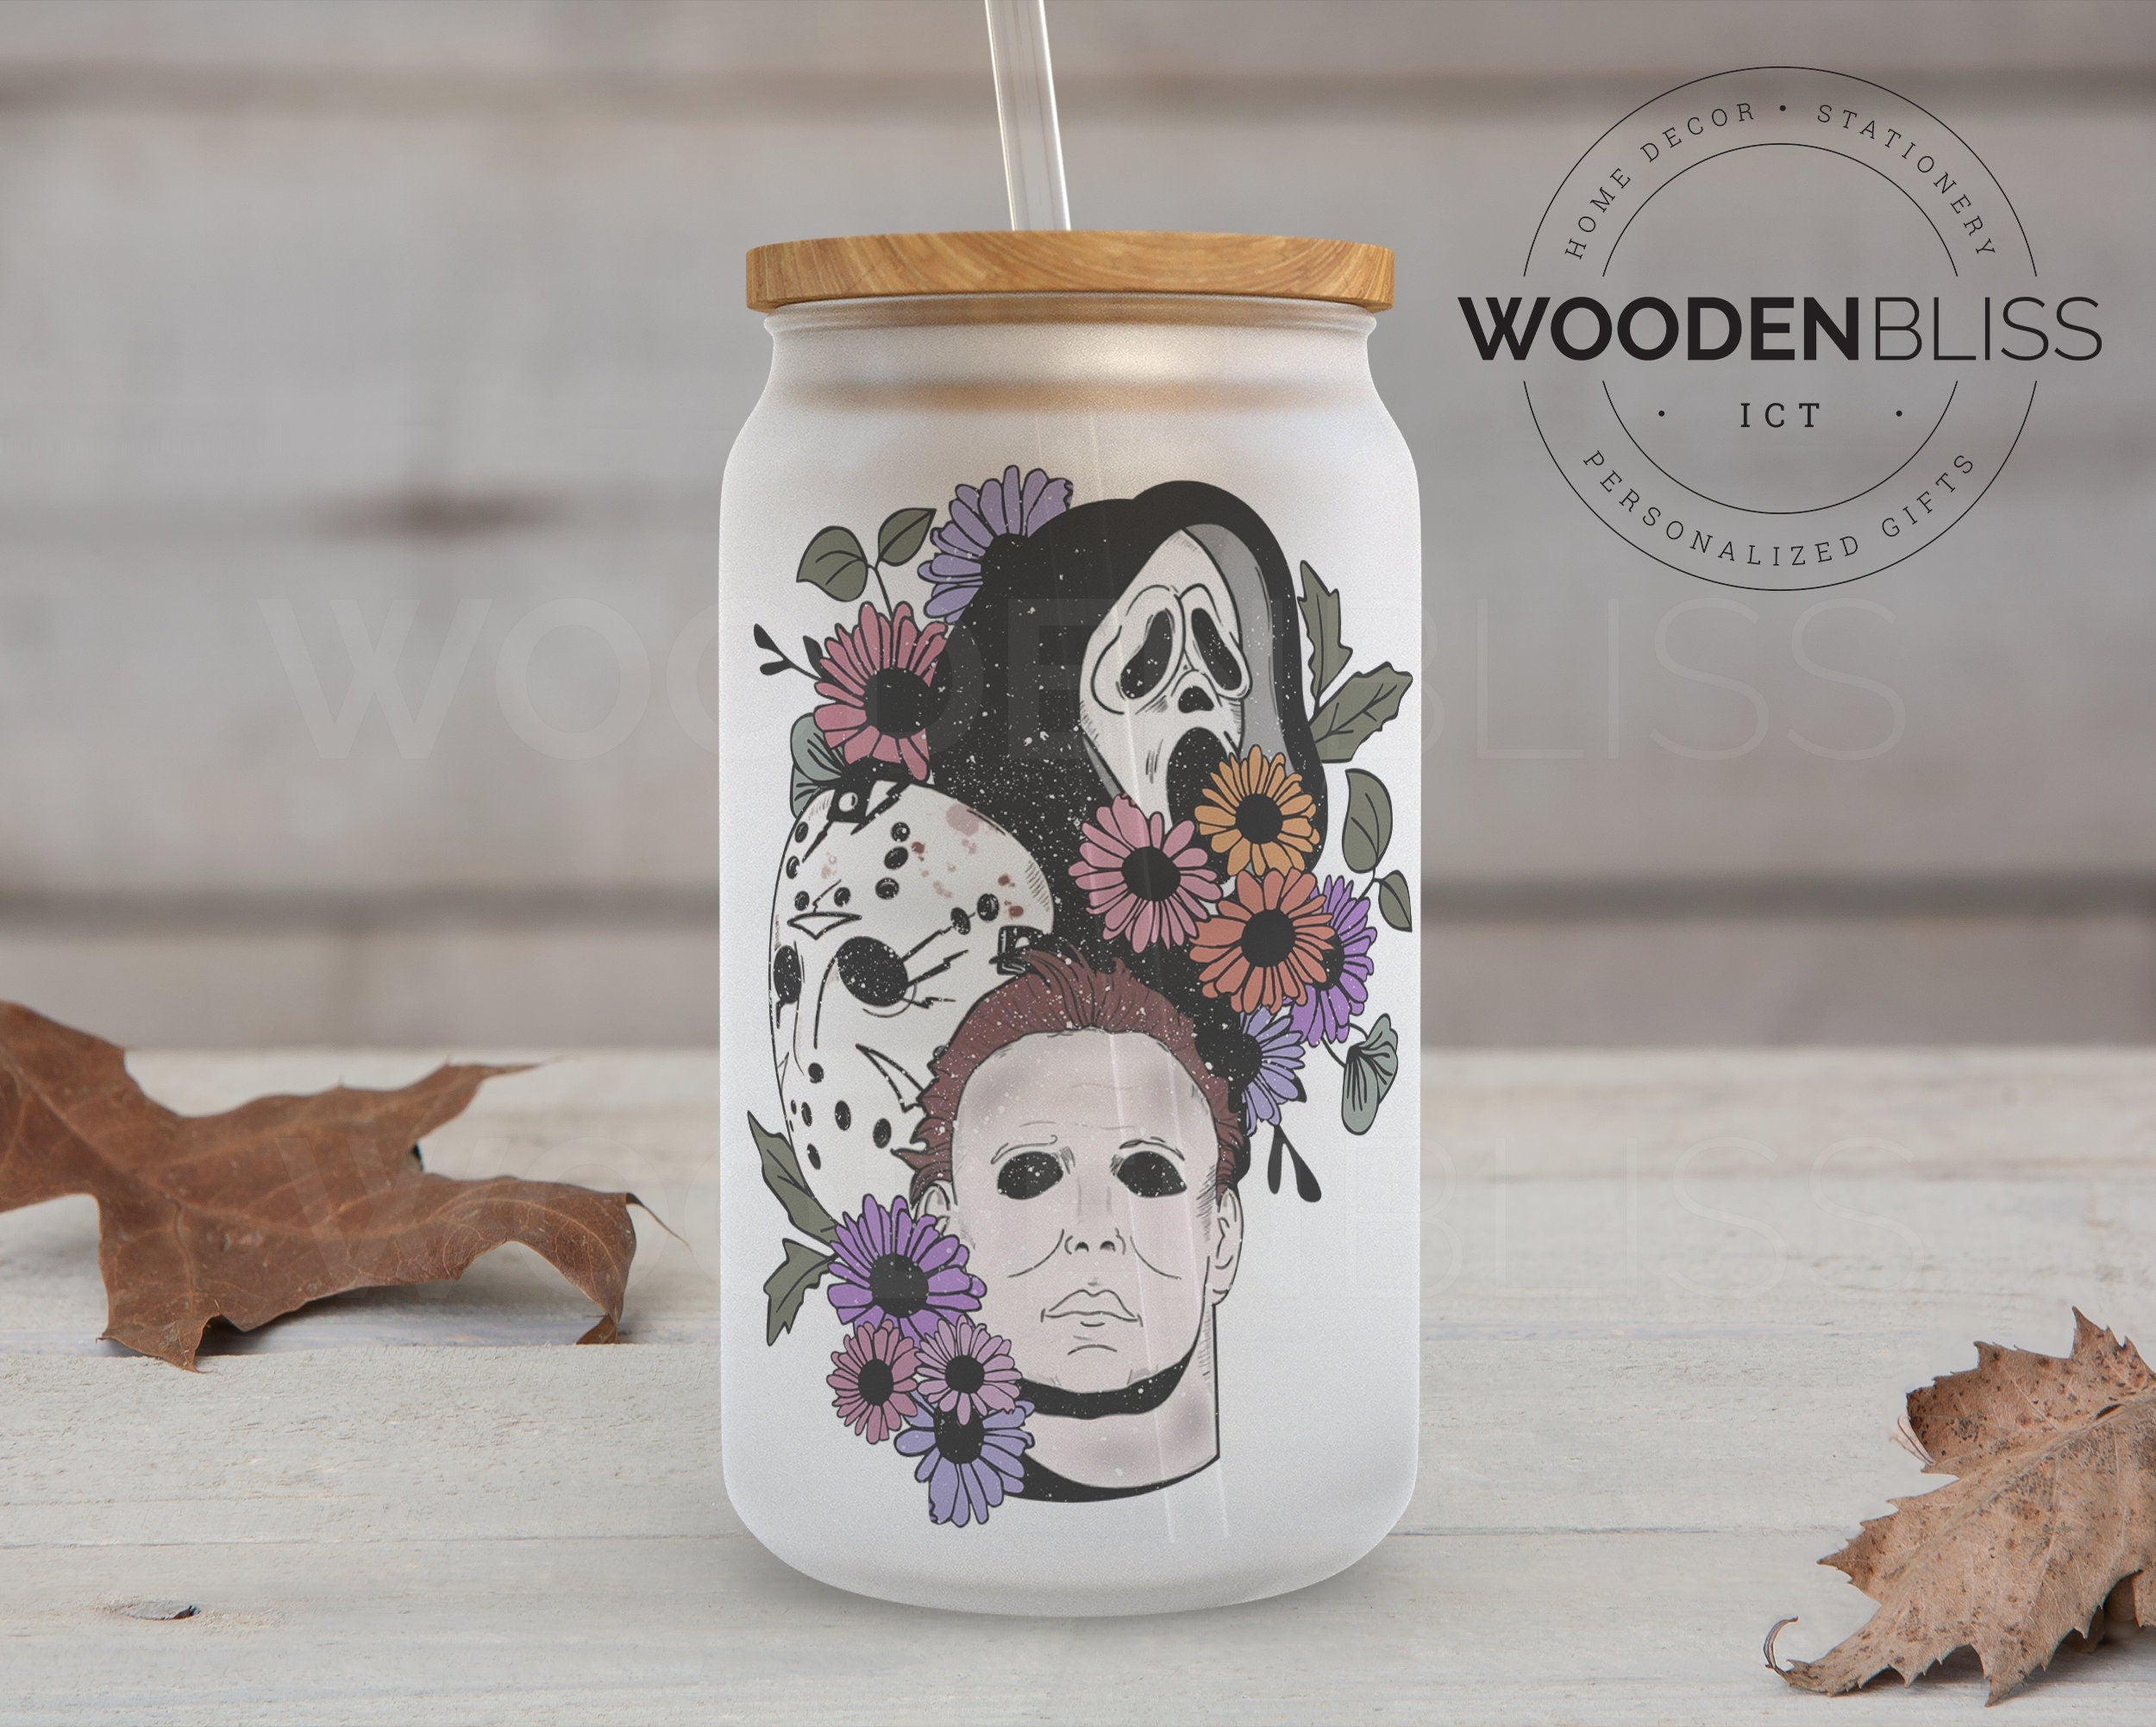 Halloween Glass Tumbler with Wooden Lid and Straw